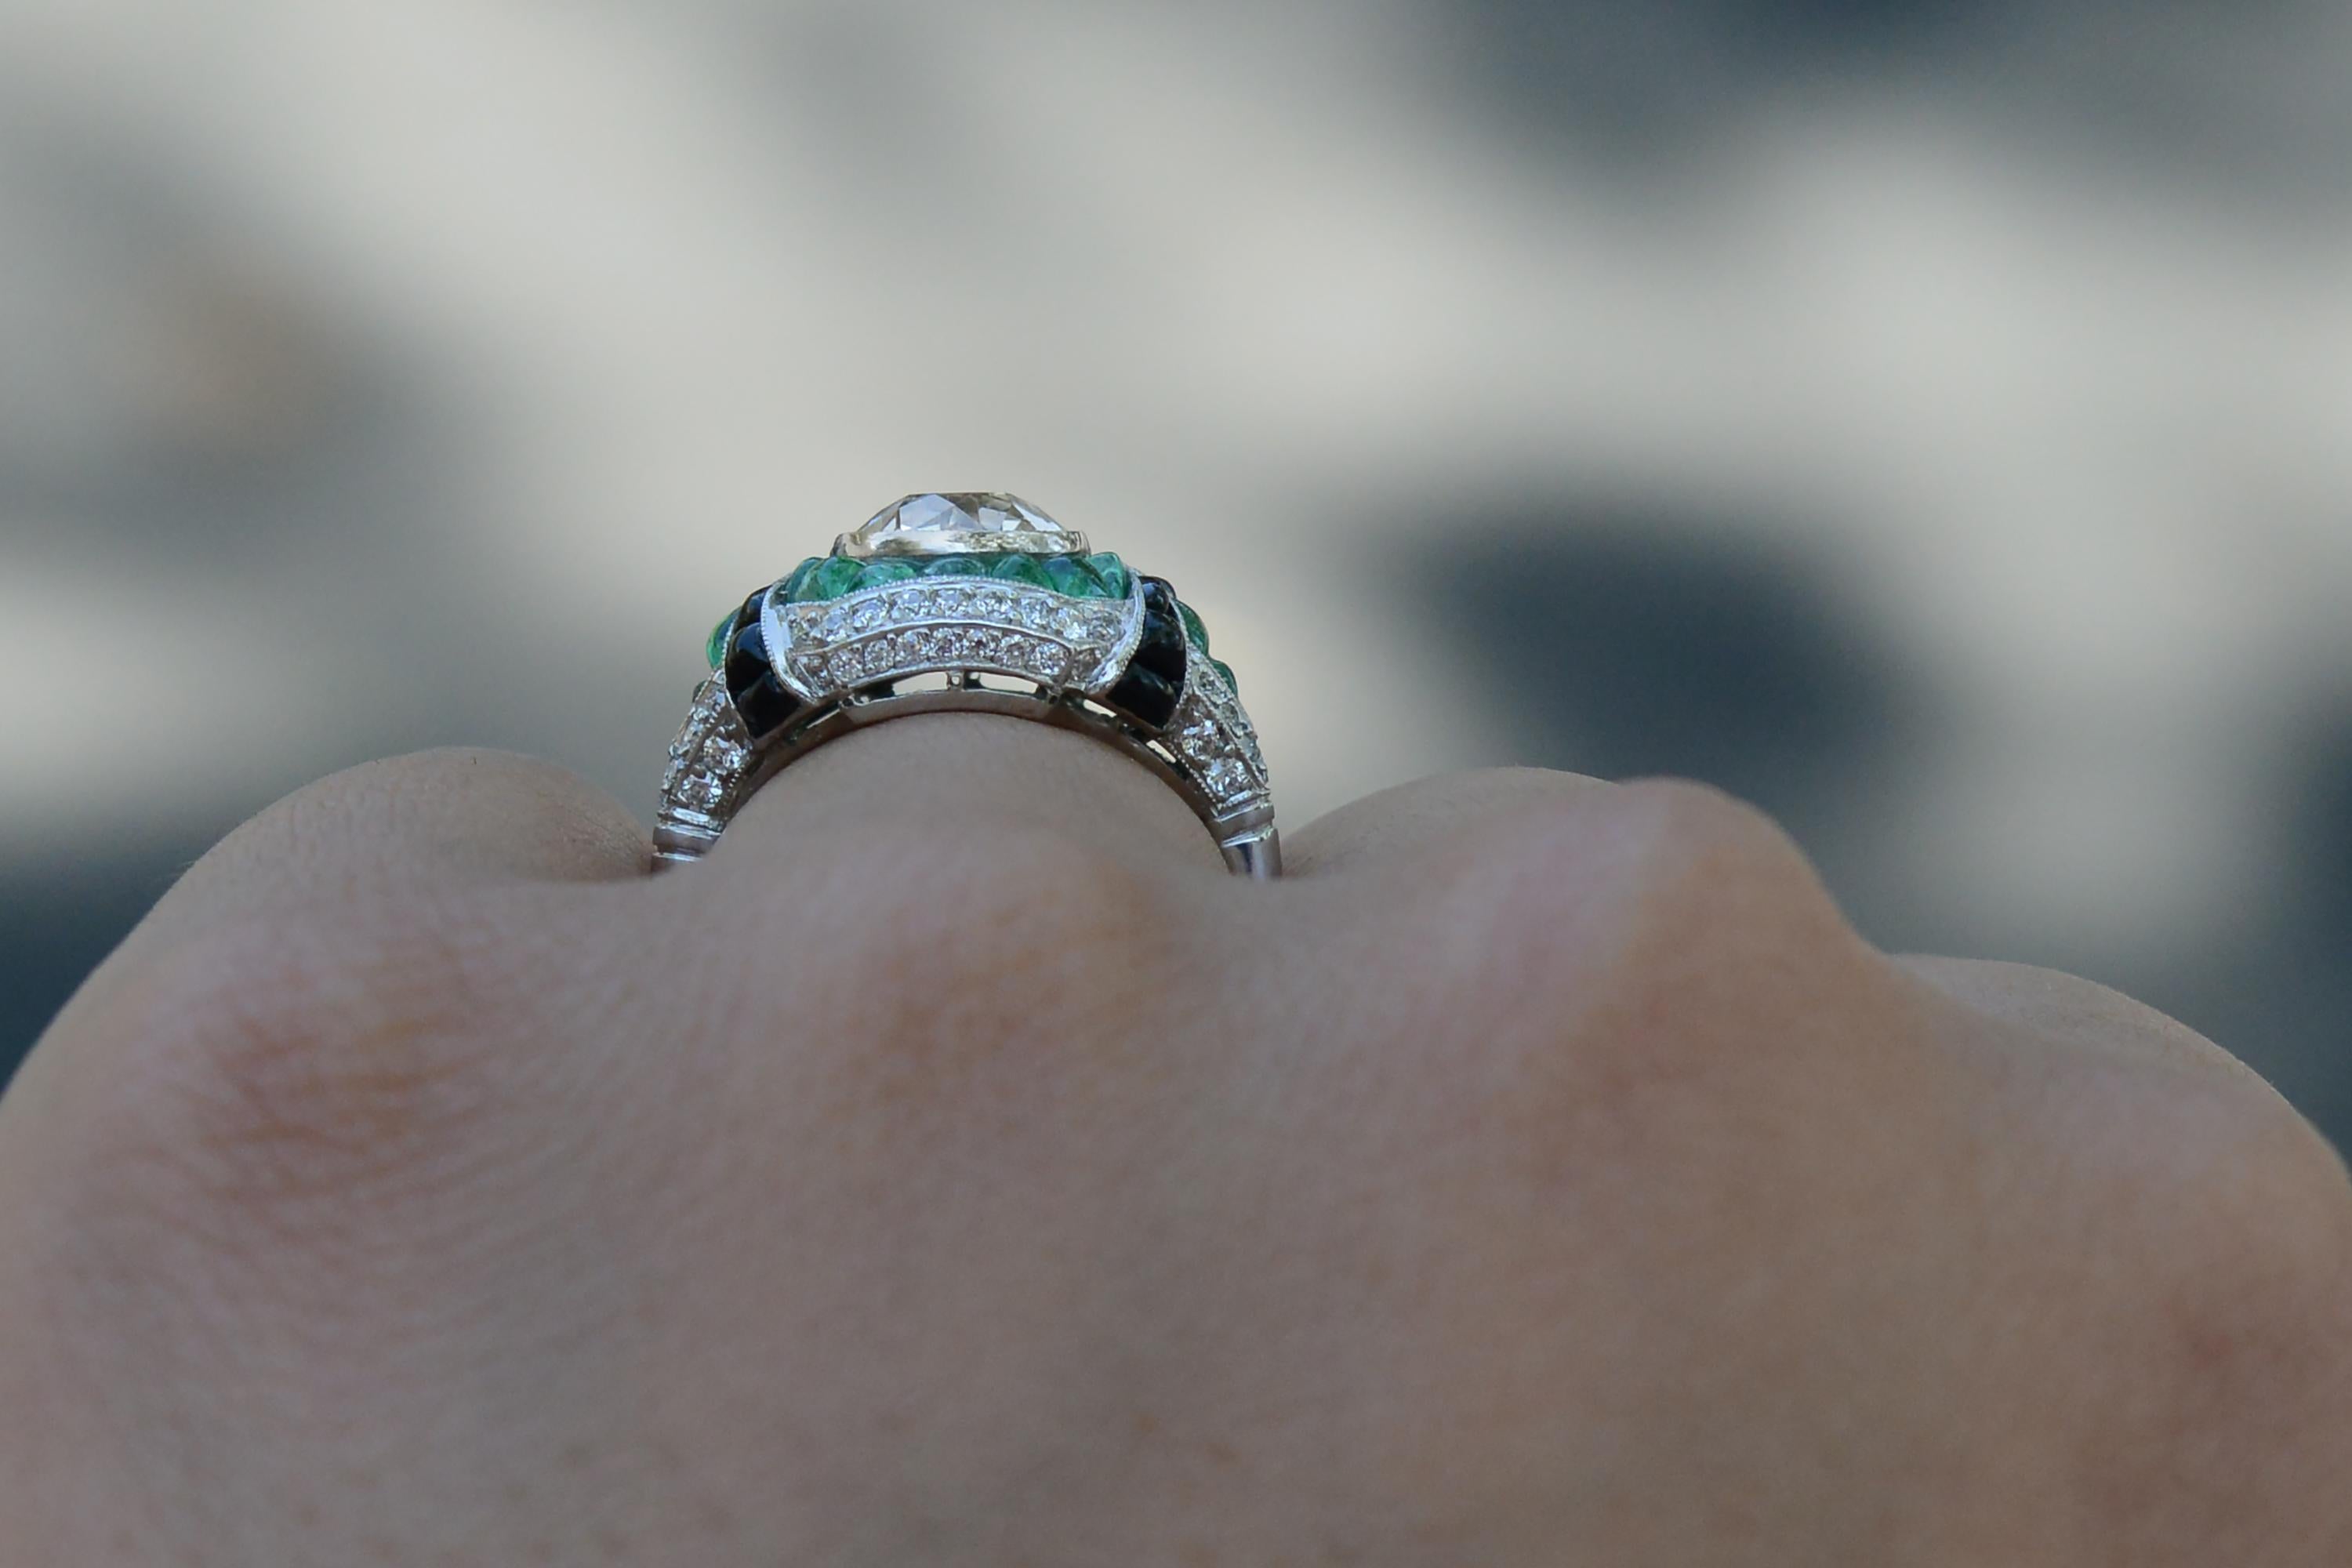 2 Carat Old European Cut Diamond Emerald Onyx Engagement Ring In New Condition For Sale In Santa Barbara, CA